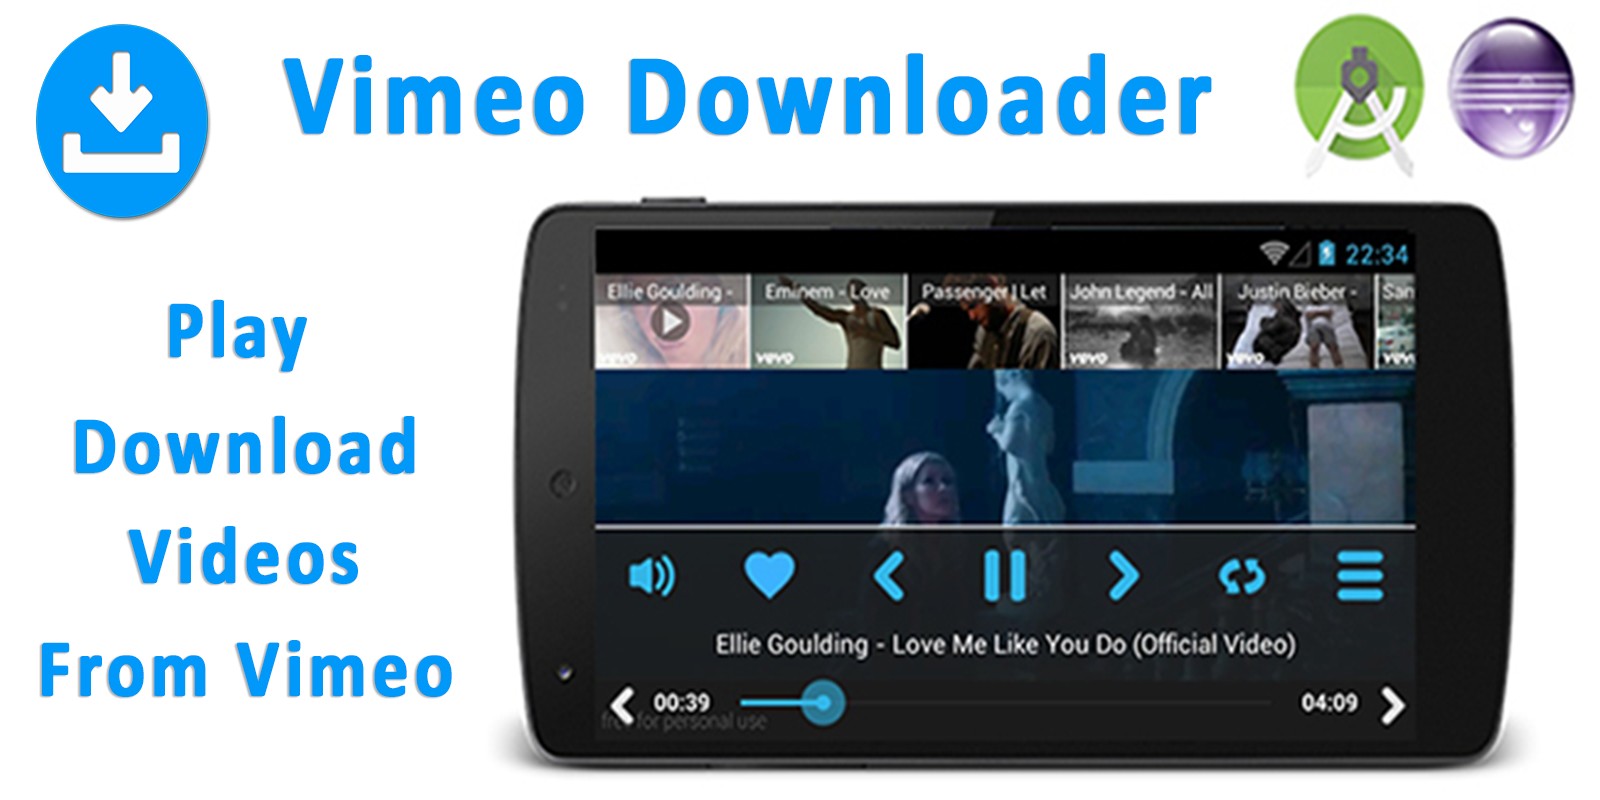 Vimeo Downloader Android App Template by Livecodedev Codester